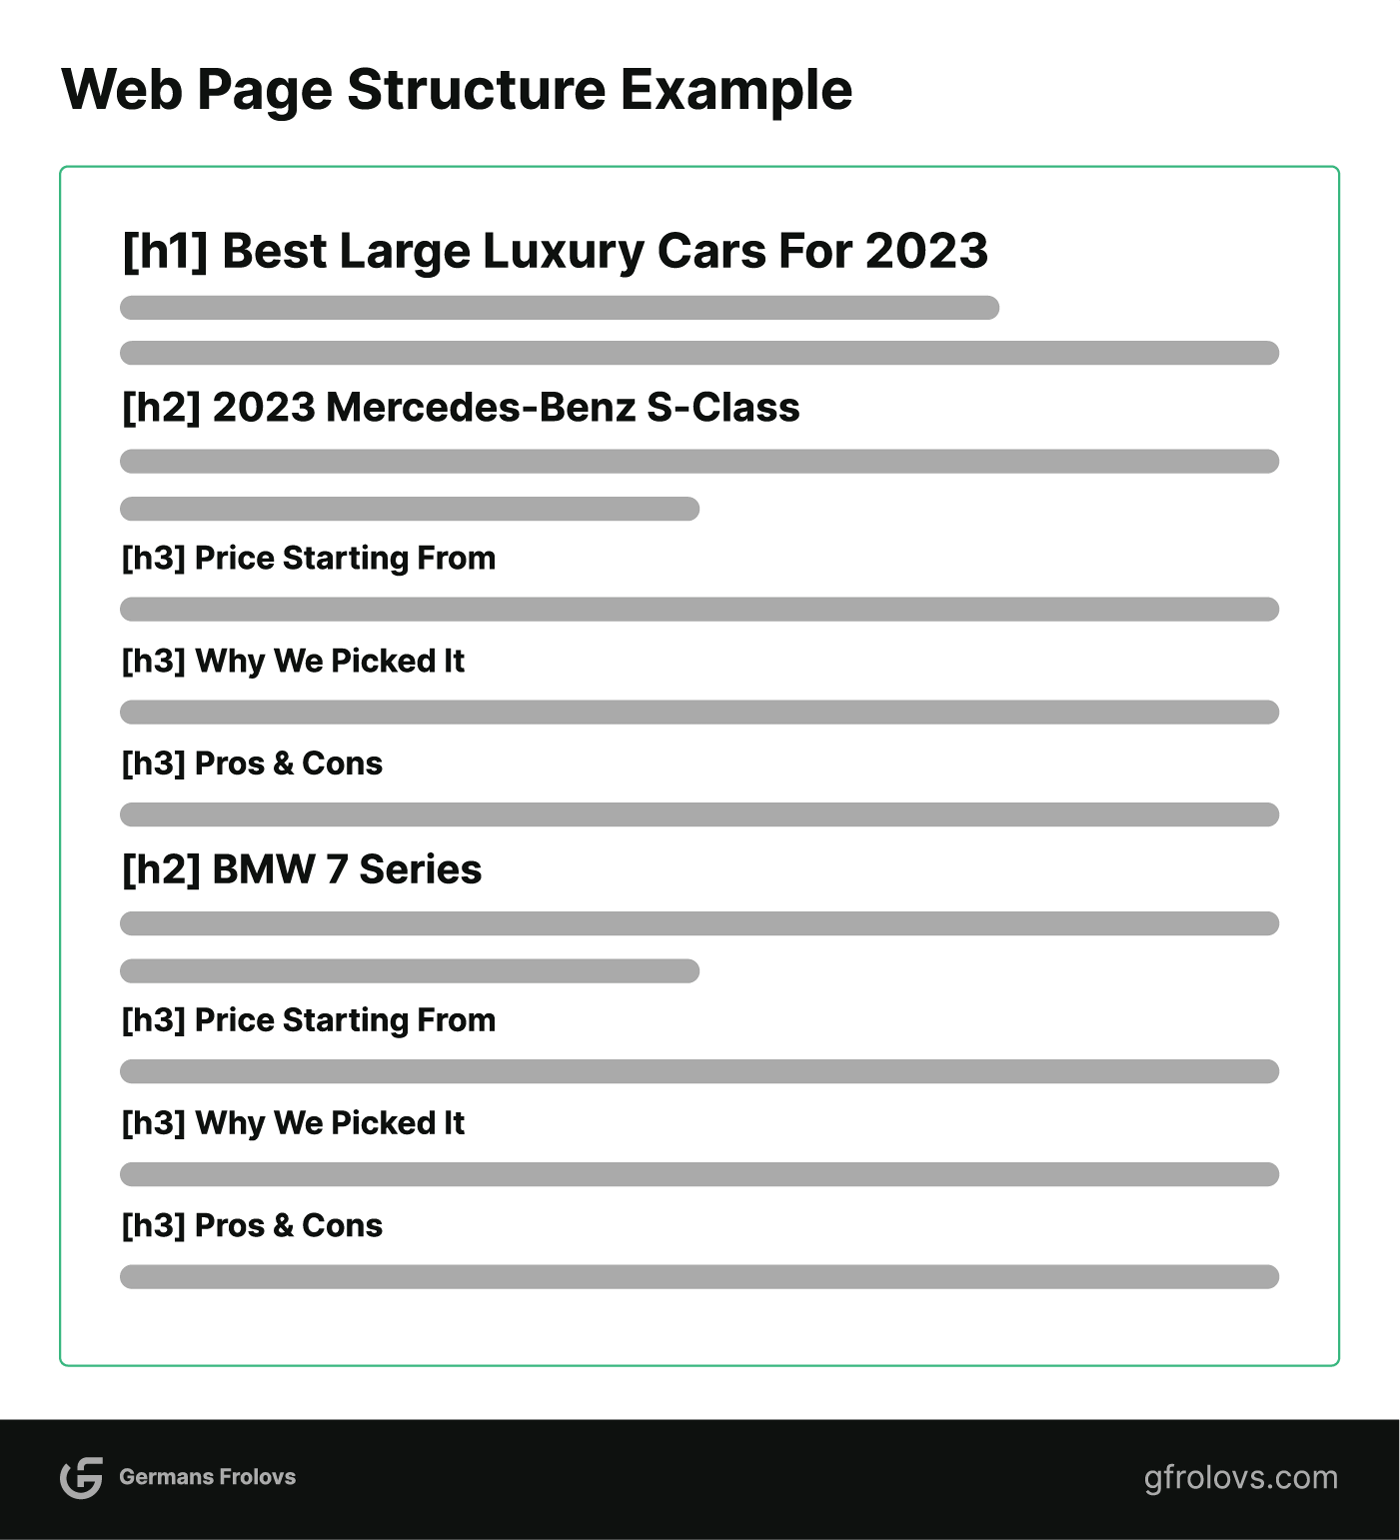 Web page content structure example